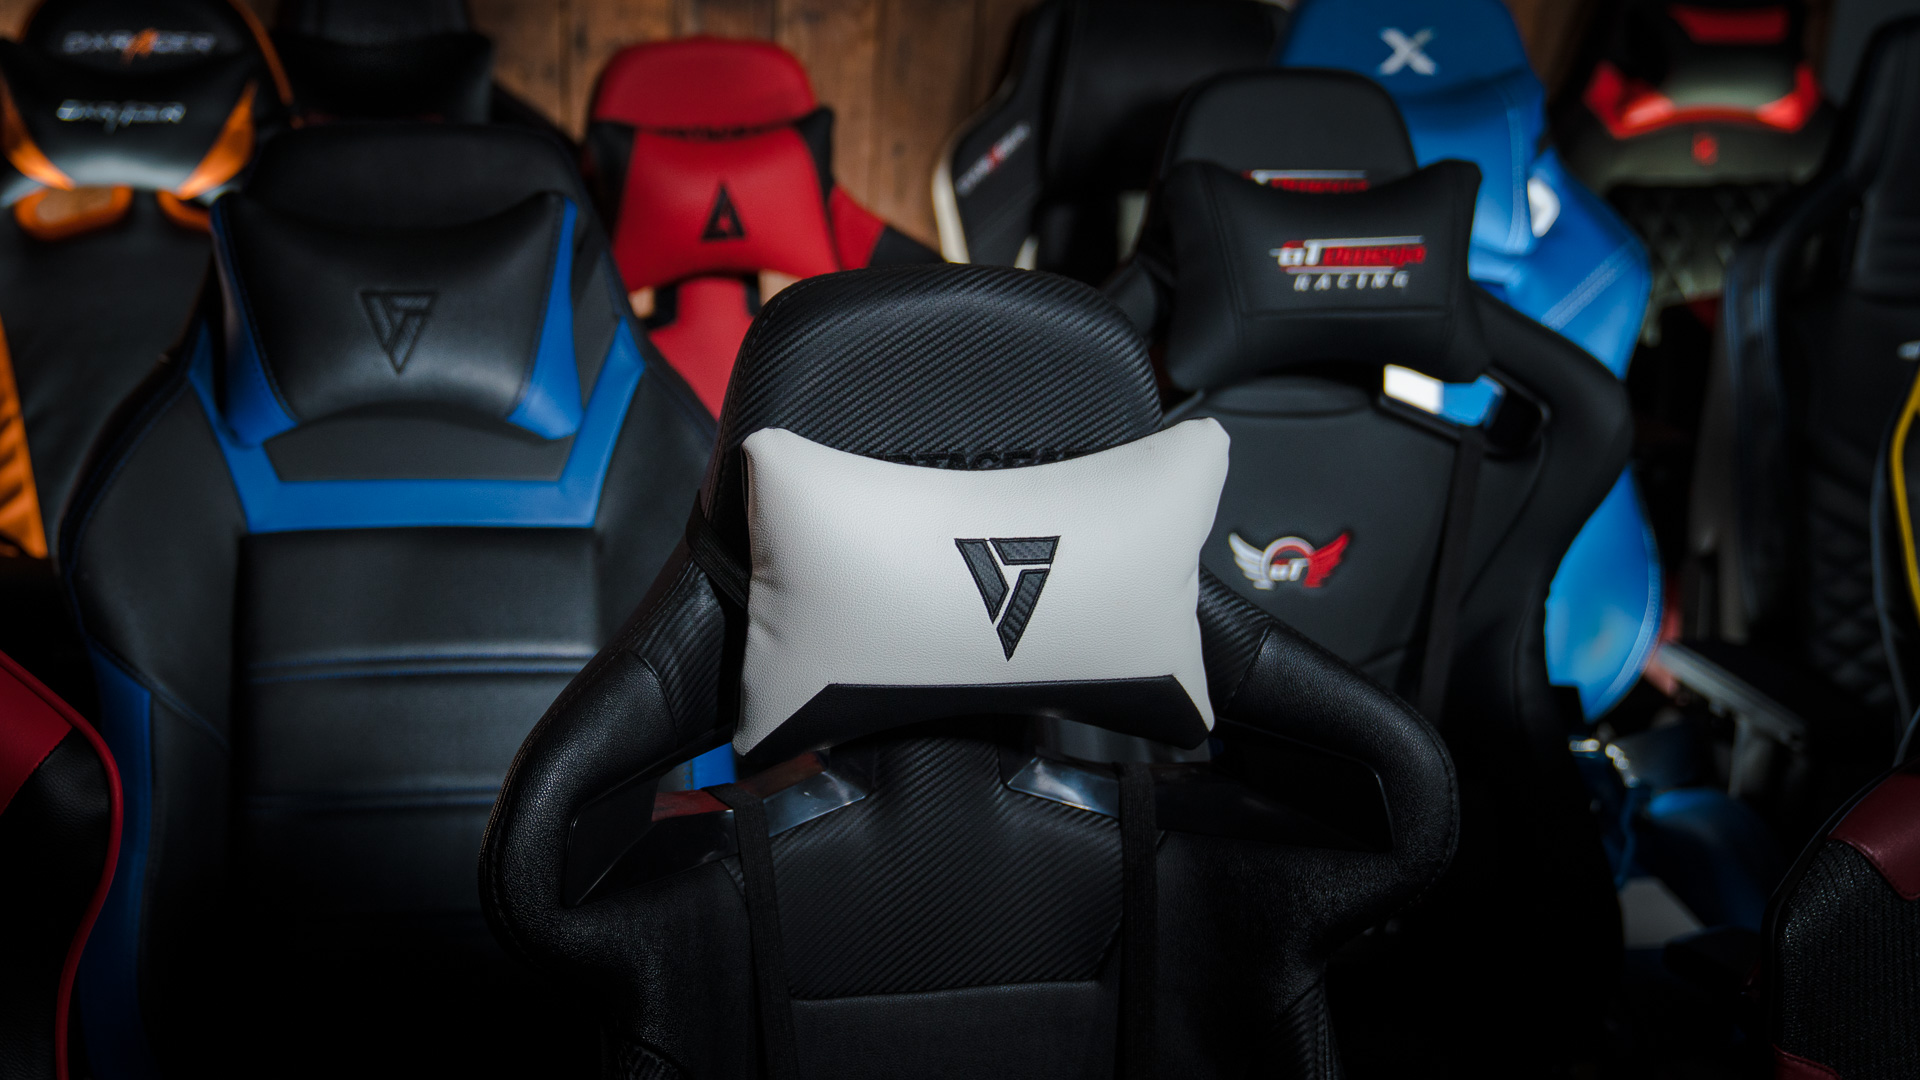 Buying a gaming chair doesn't have to be complicated. Newegg Insider will show you what to look for when buying a chair.